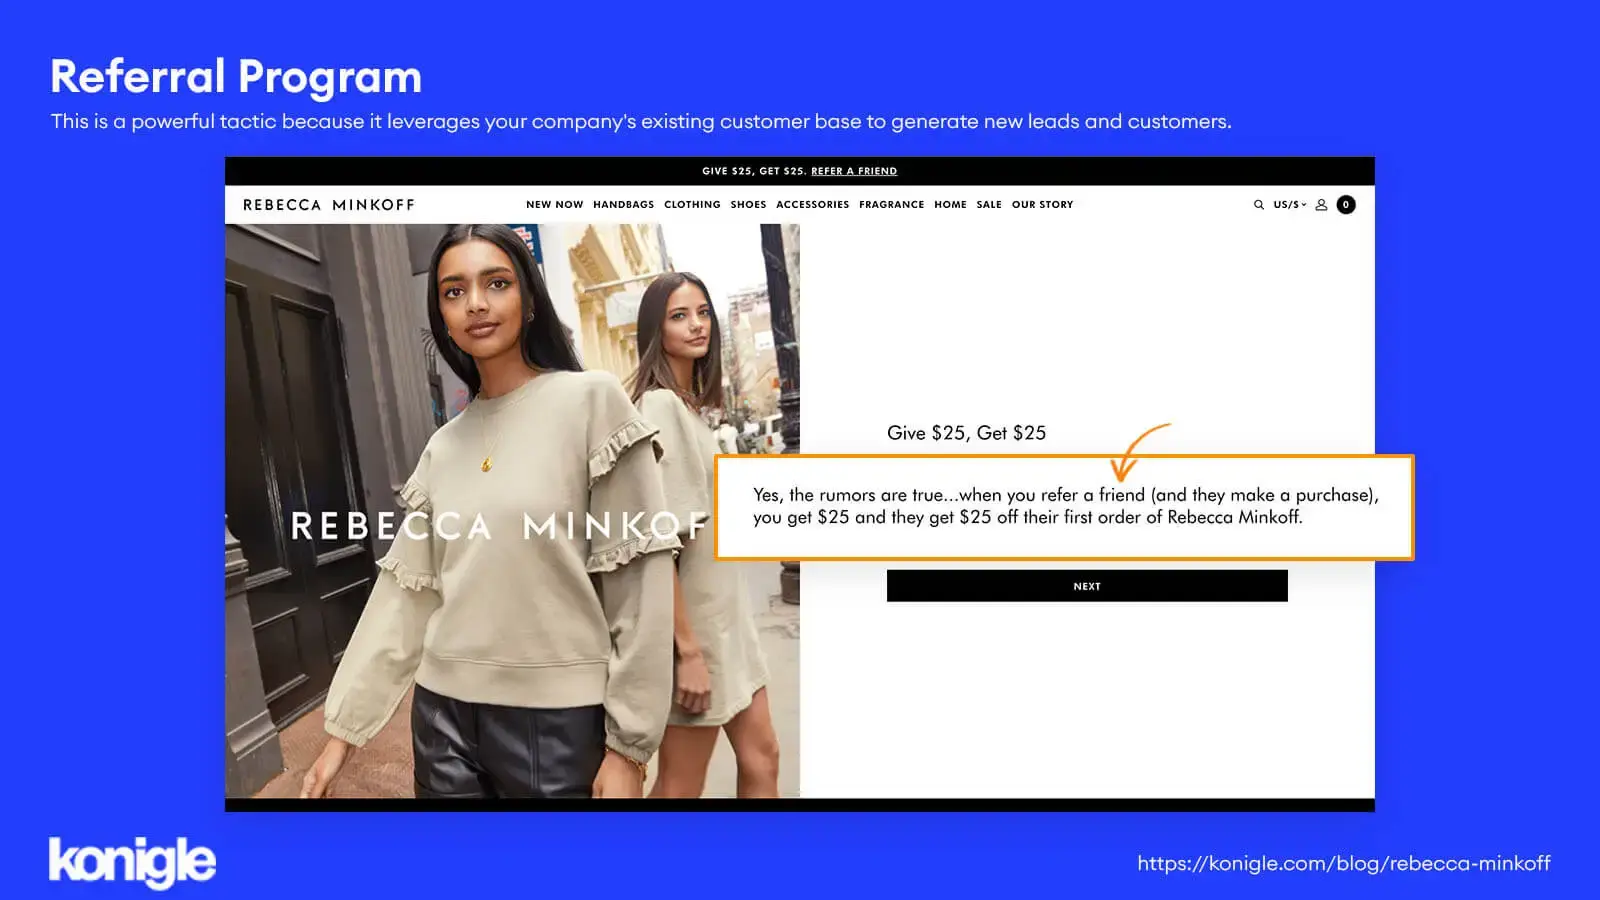 Referral page on Rebecca Minkoff that creates a referral link when customer inputs their email